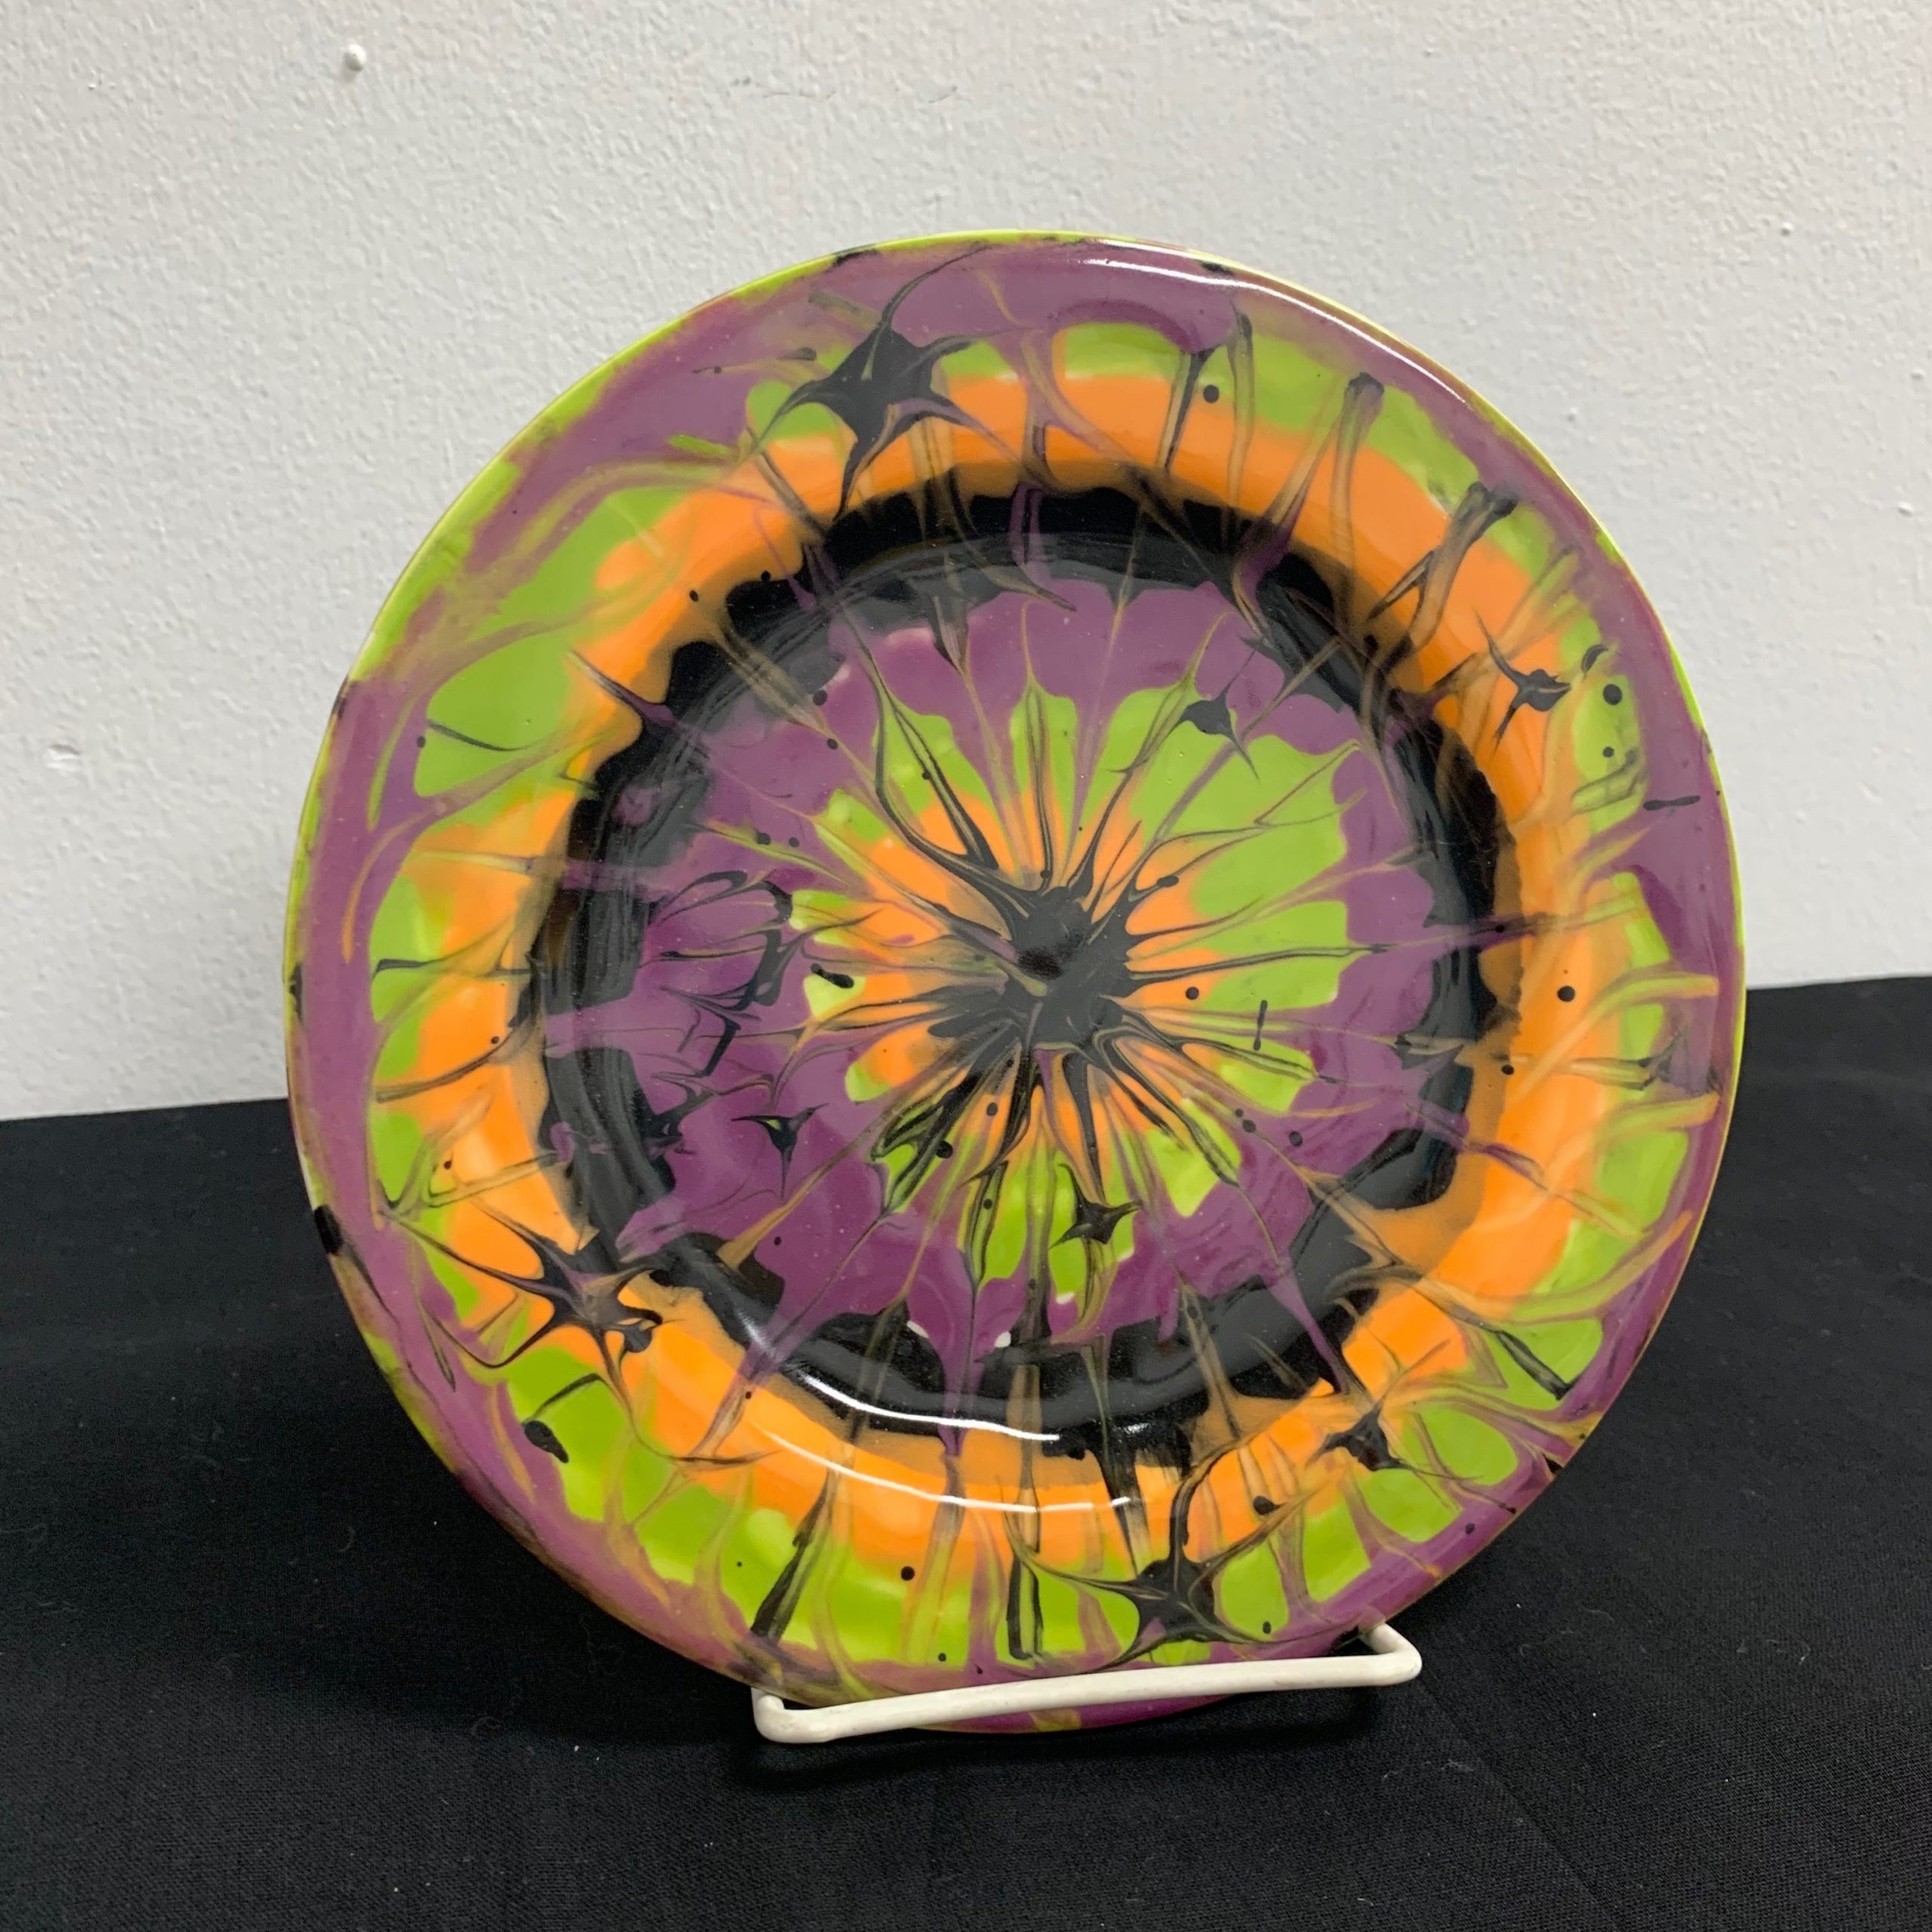 Fall Camp - Radial Art on Pottery